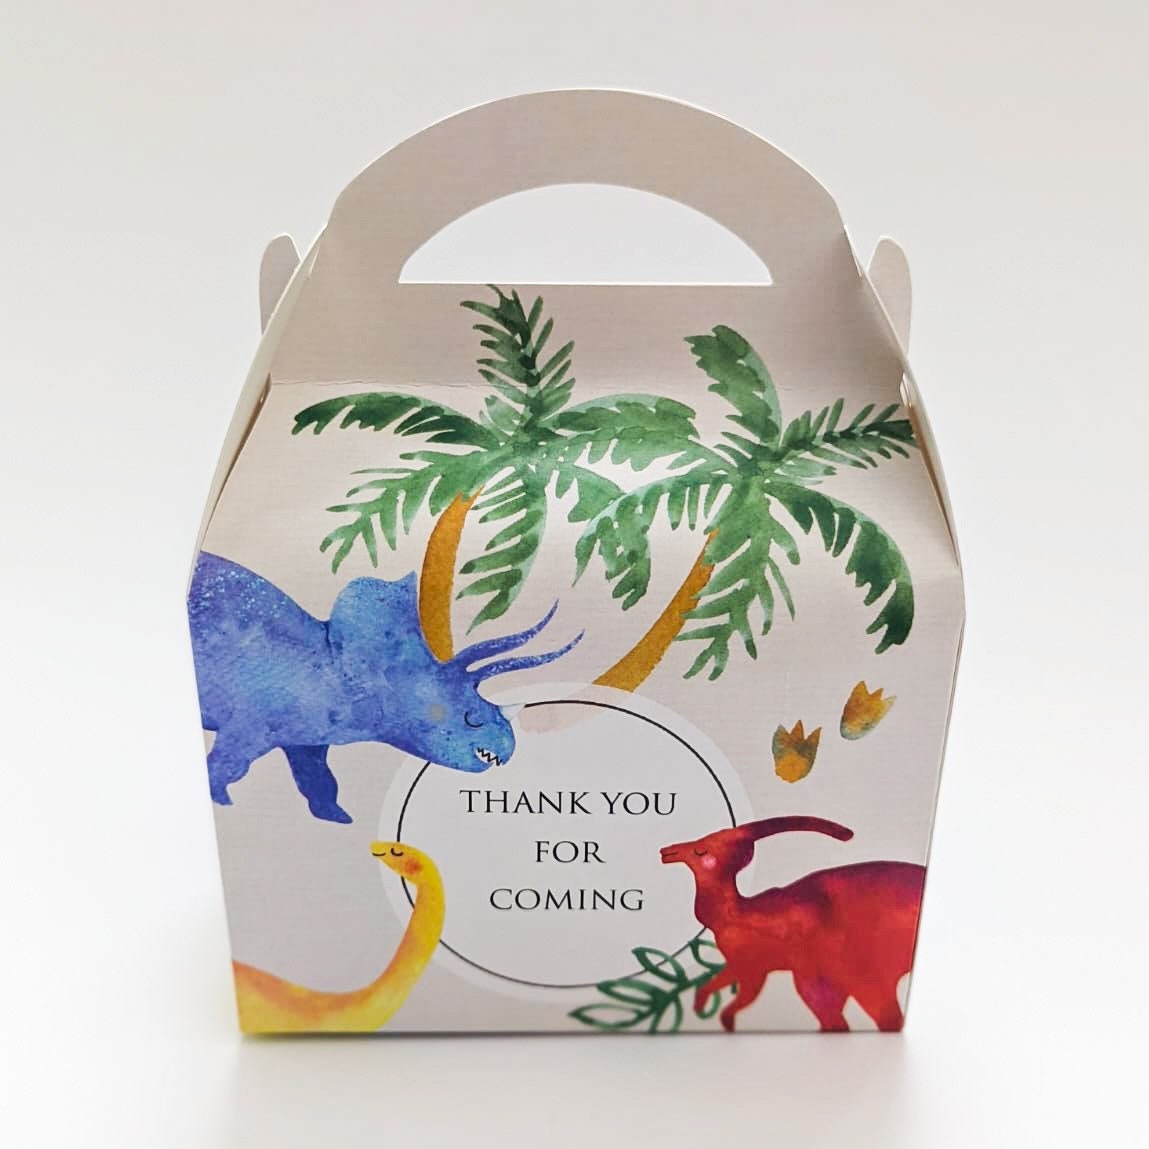 Dinosaurs Personalised Children’s Party Box Gift Bag Favour